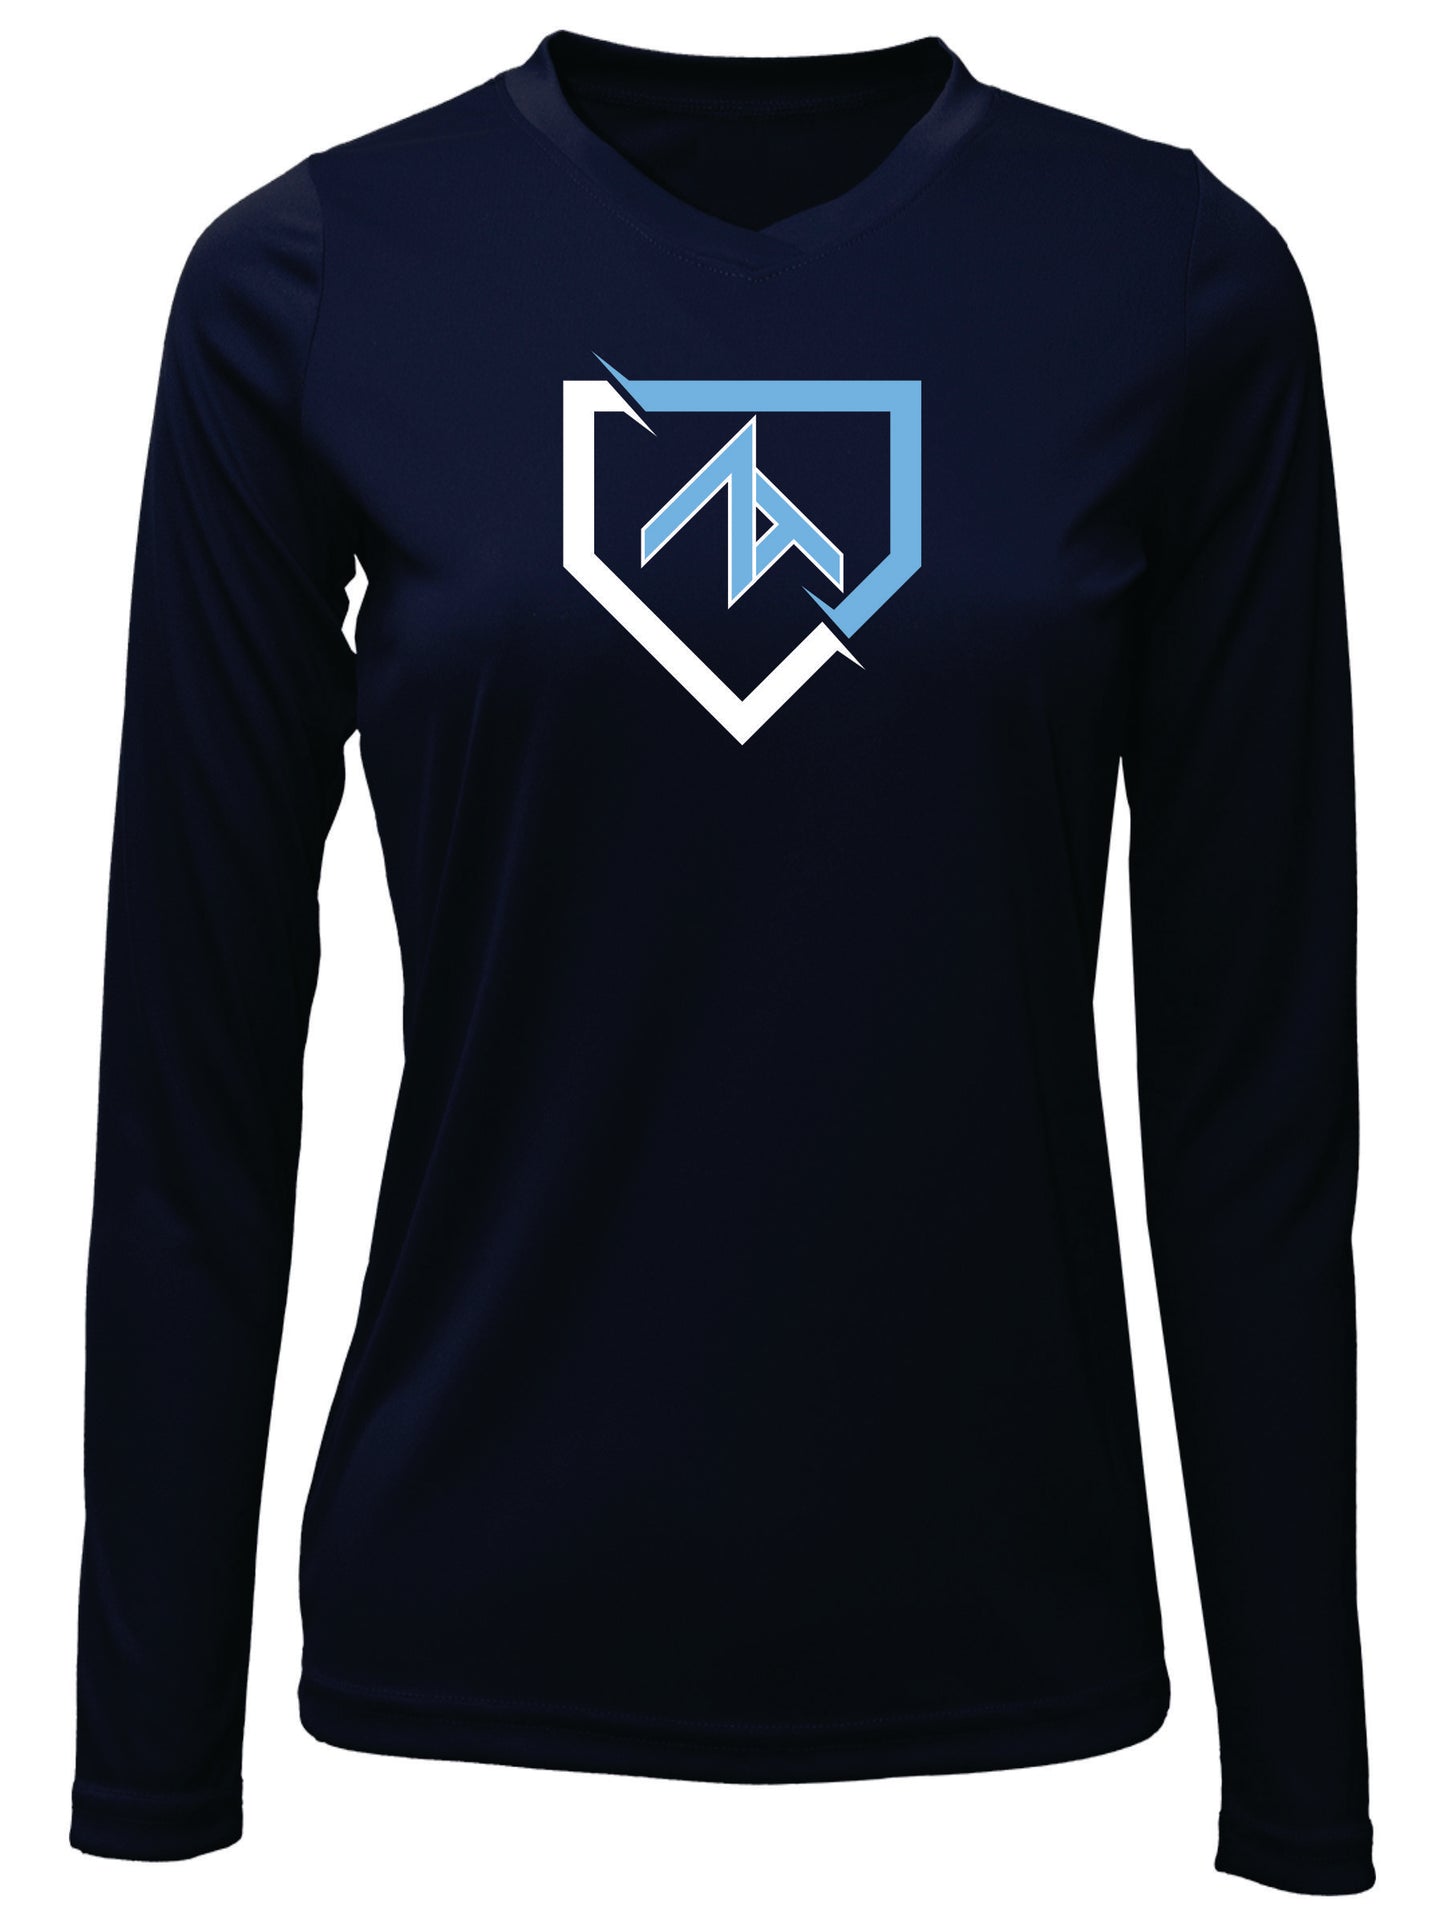 Ladies Long Sleeve "FRACTURED PLATE" Cotton T-shirt